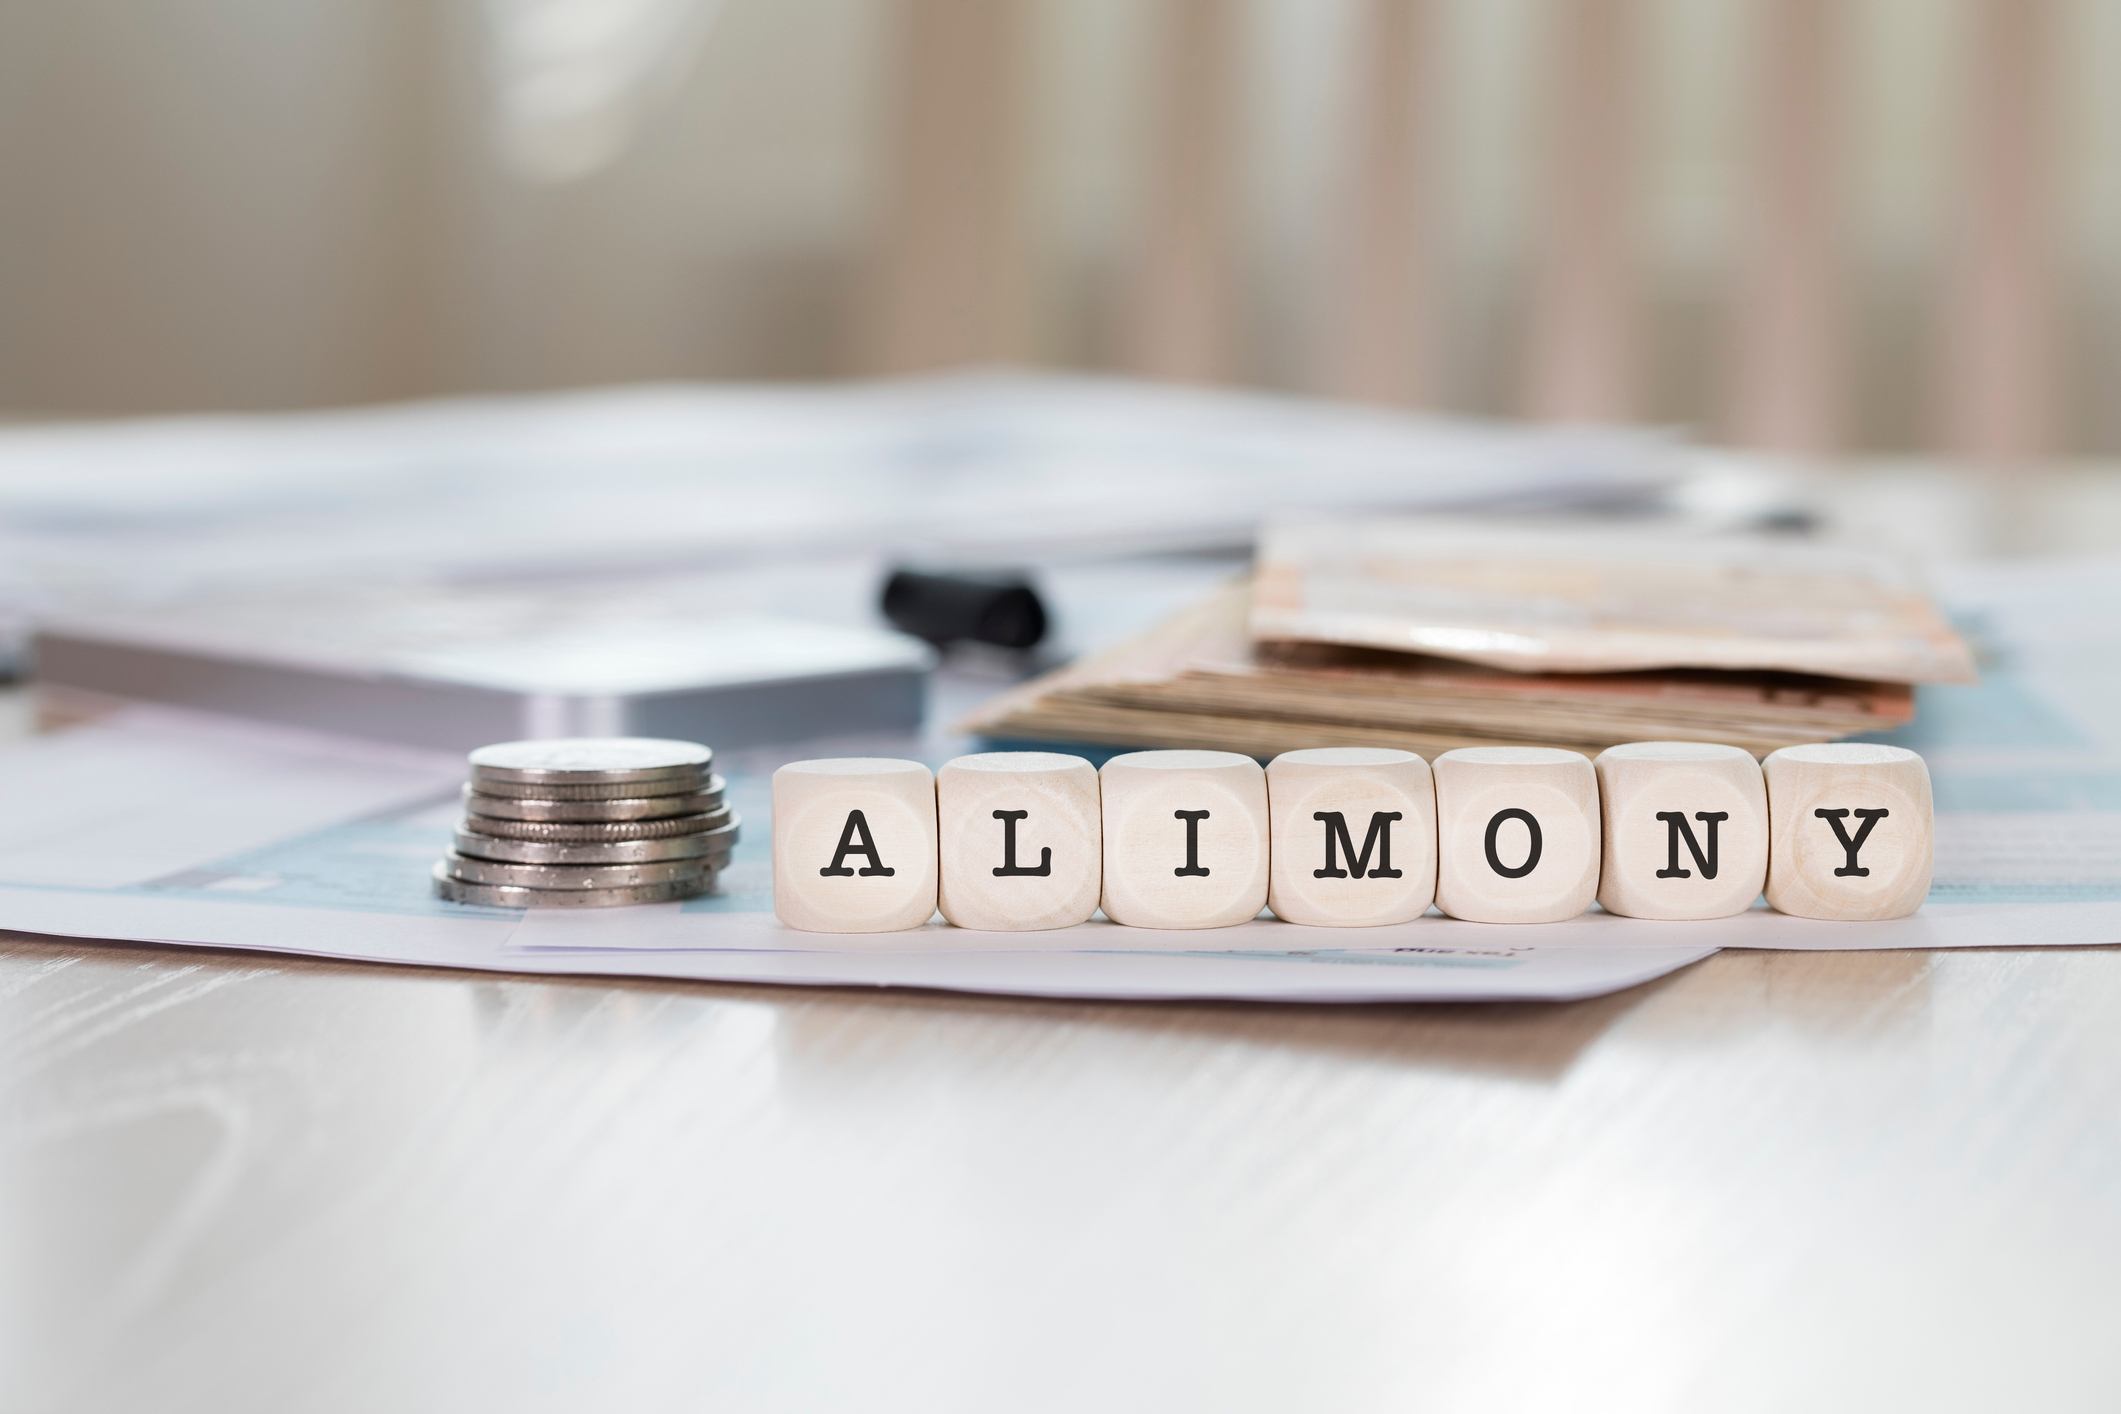 ALIMONY spelled on cubes